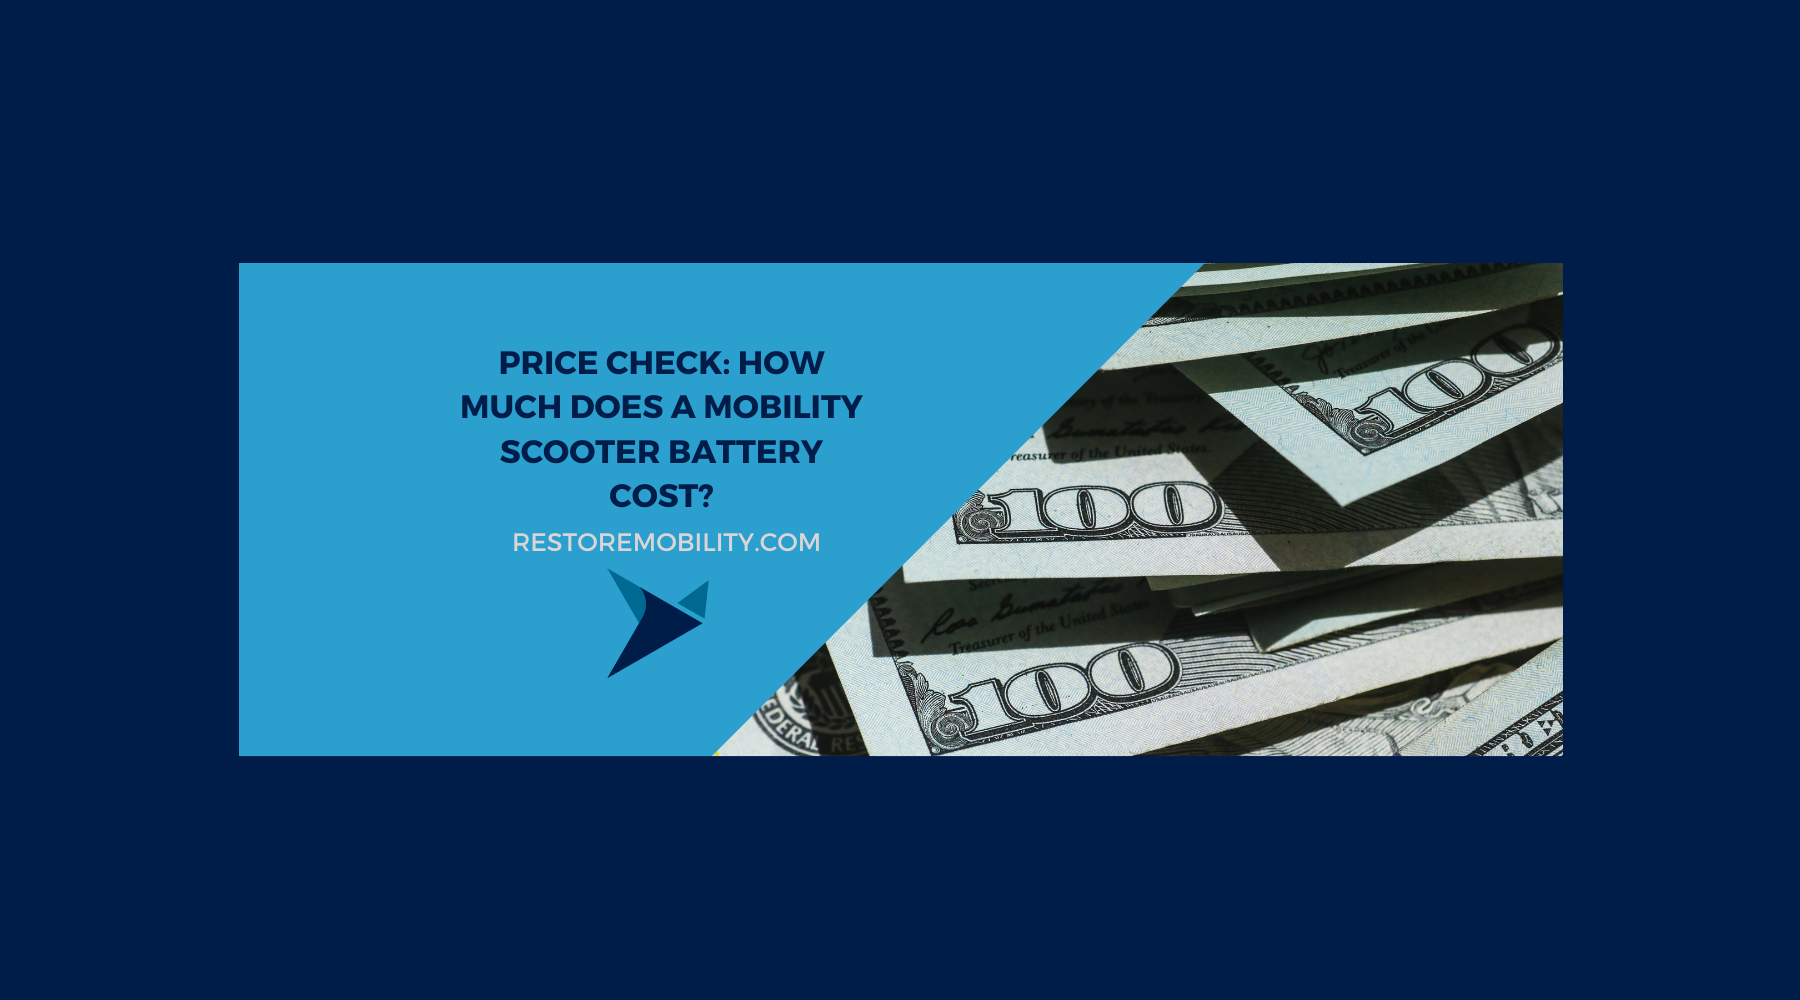 Mobility Scooter Battery Prices: How Much Do They Cost?